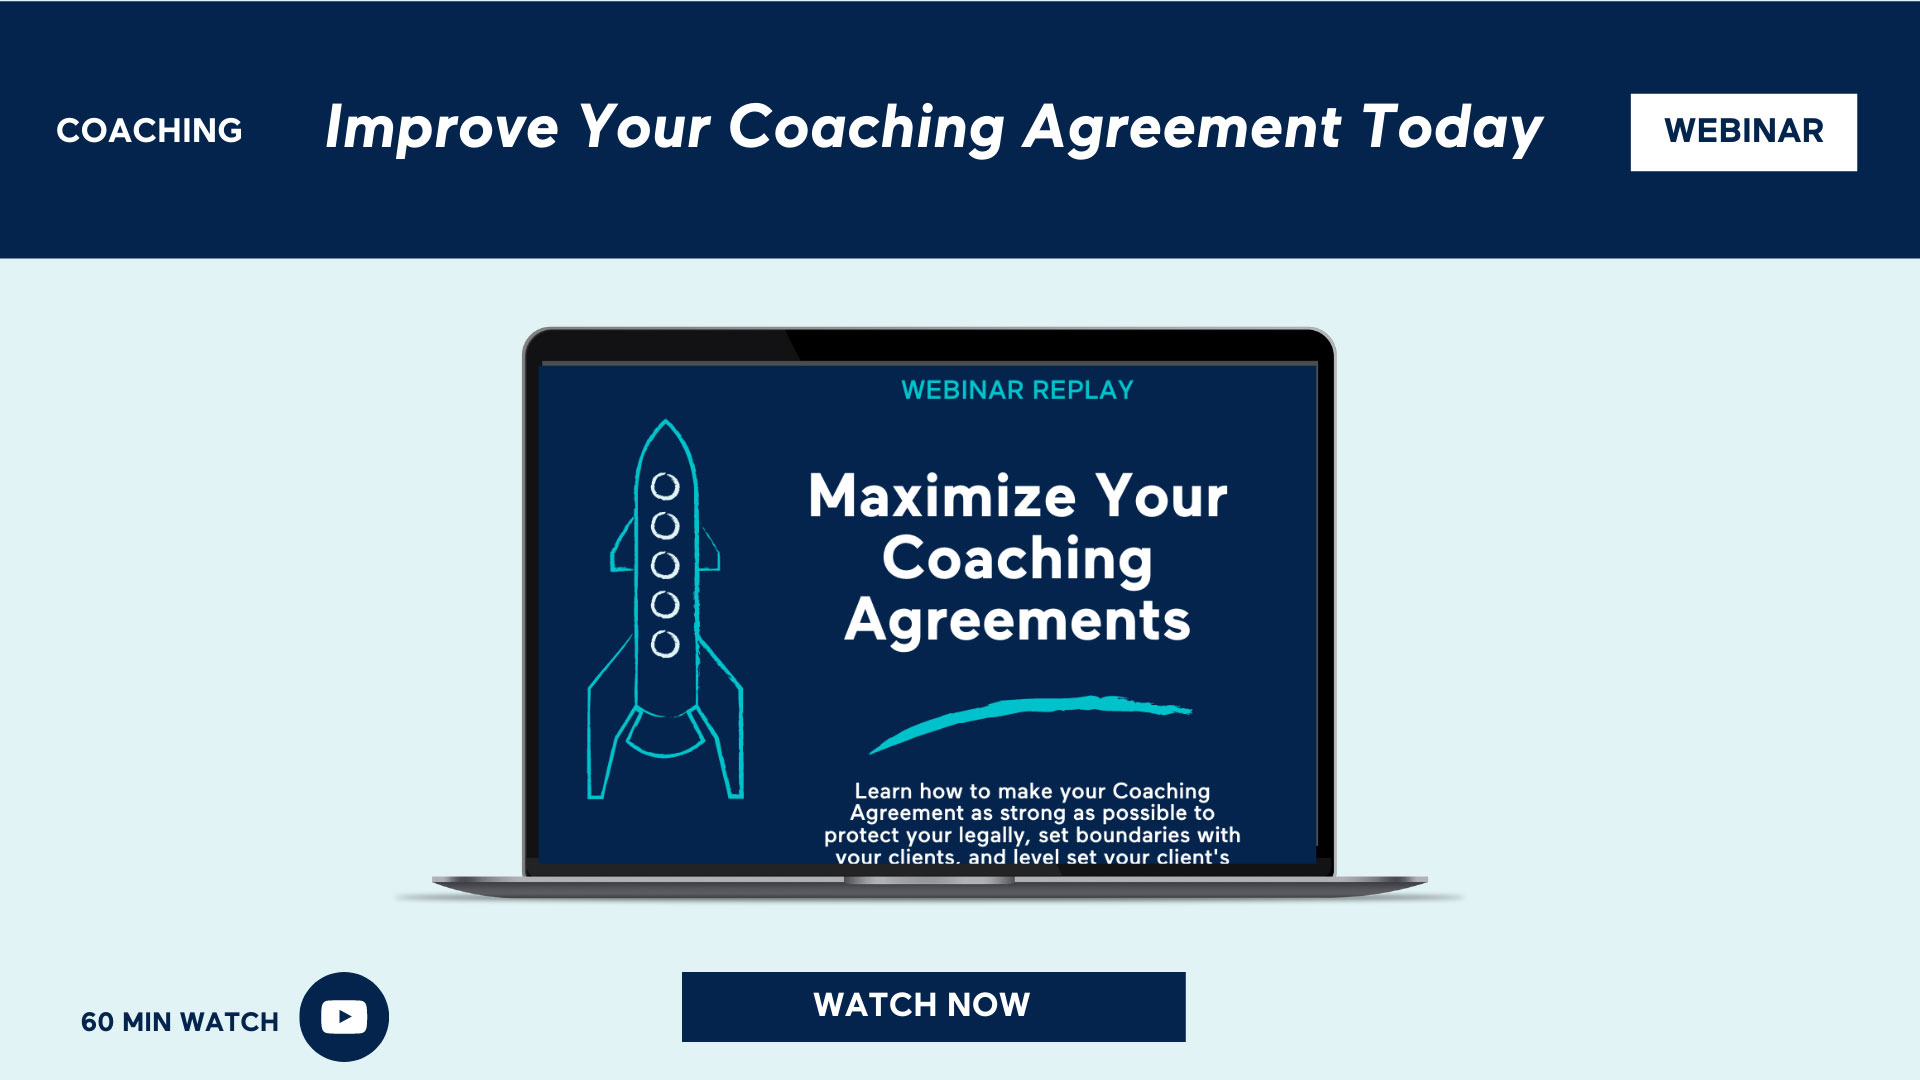 Maximize Your Coaching Agreement